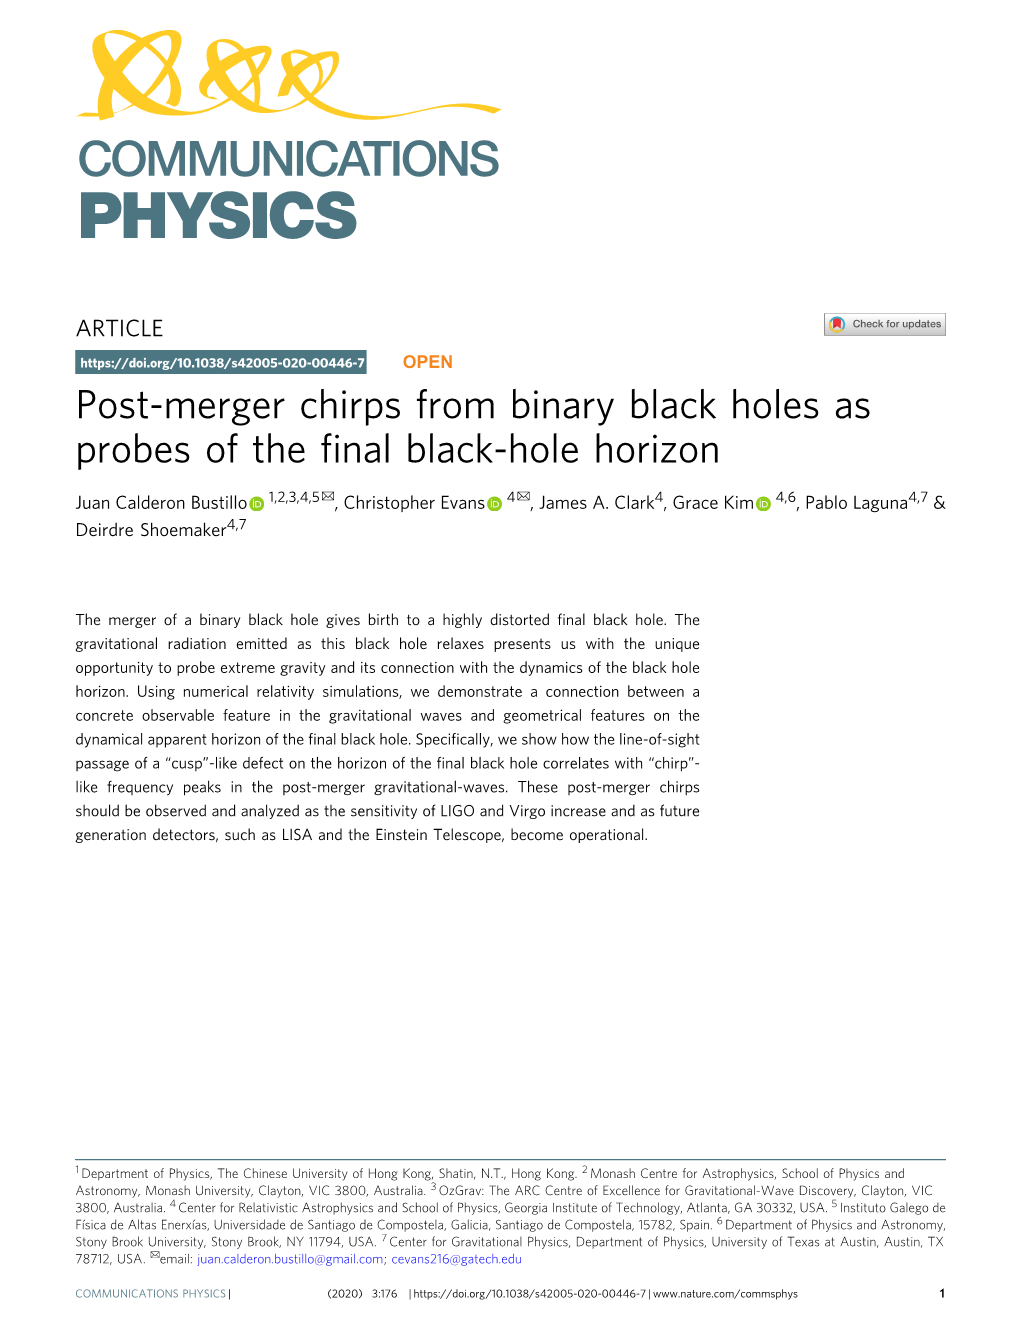 Post-Merger Chirps from Binary Black Holes As Probes of the Final Black